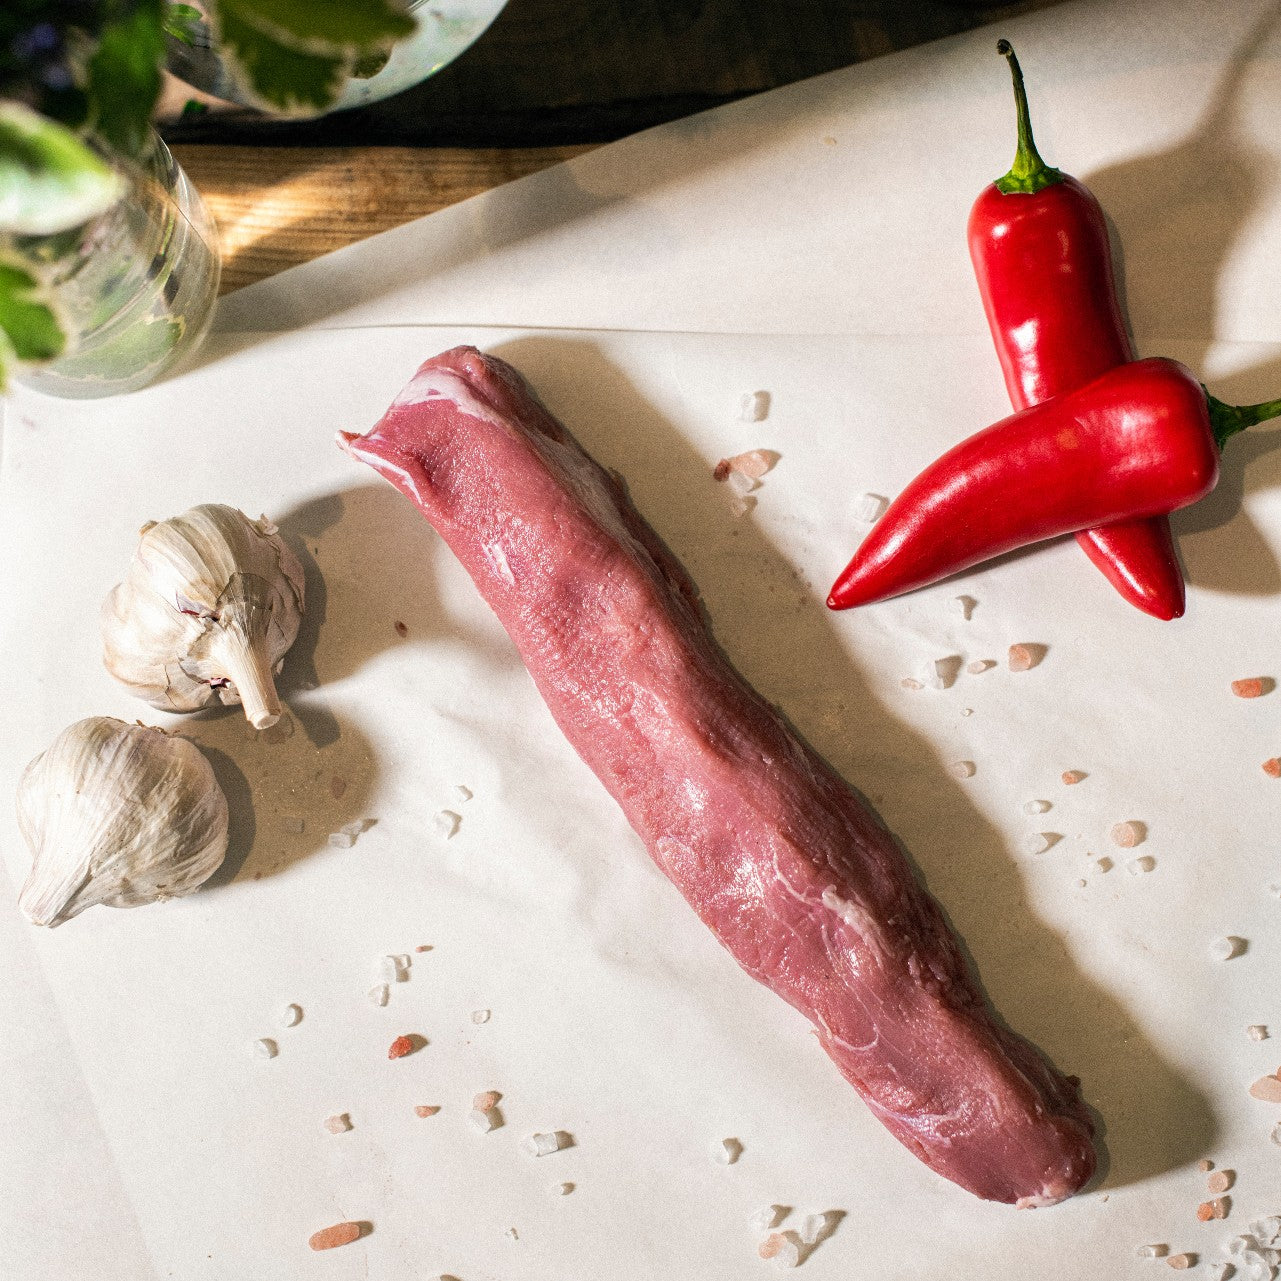 Goodwood's organic grass-fed pork tenderloin, displayed on a chopping board with garlic cloves and red peppers.